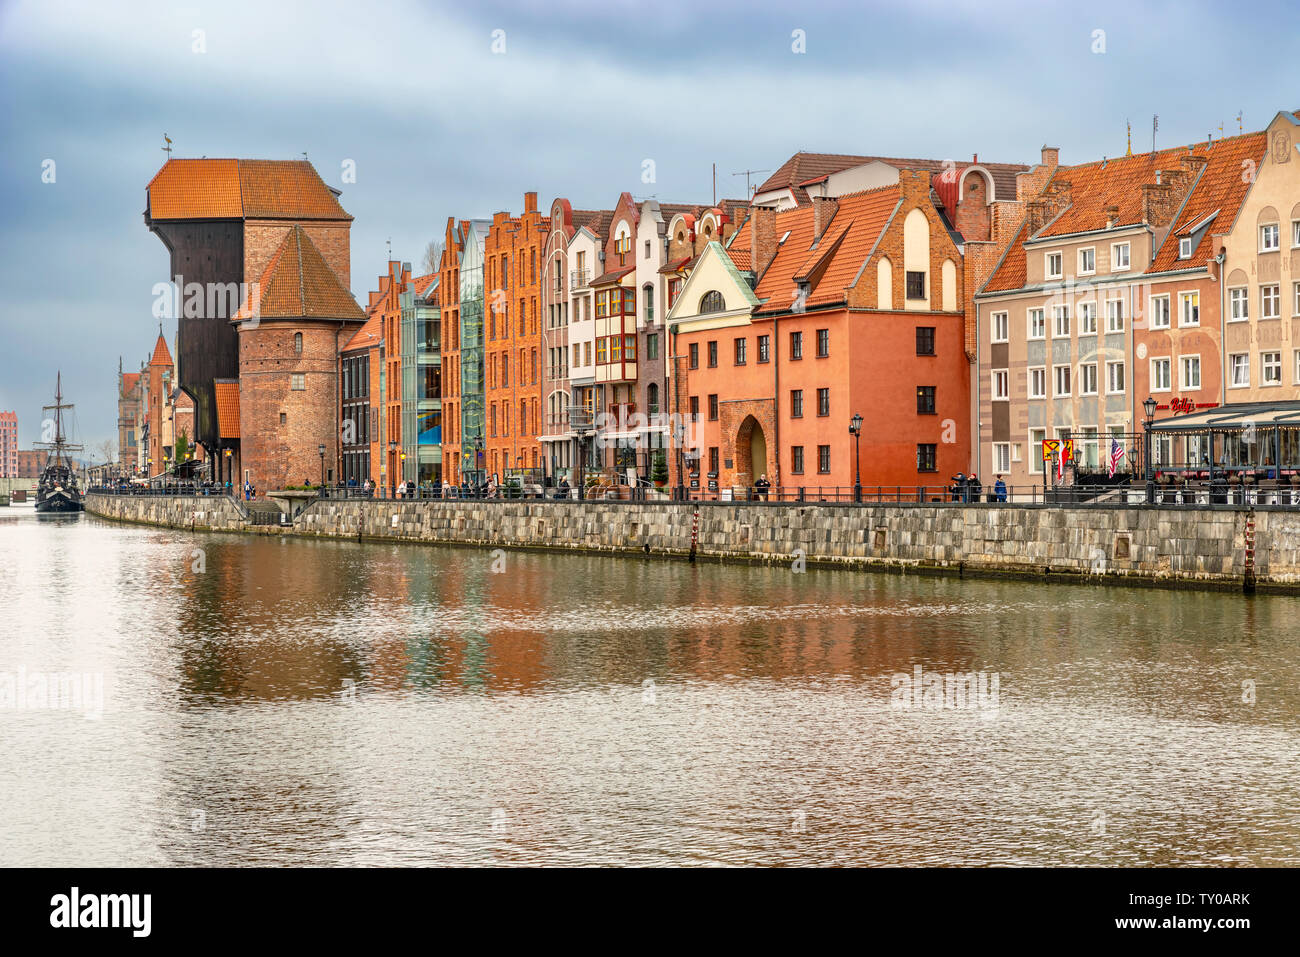 Gdansk, Poland – Feb 14, 2019: The classic view of Gdansk with the historic Gdansk Crane and the Hanseatic-style buildings along River Motlawa, Poland Stock Photo